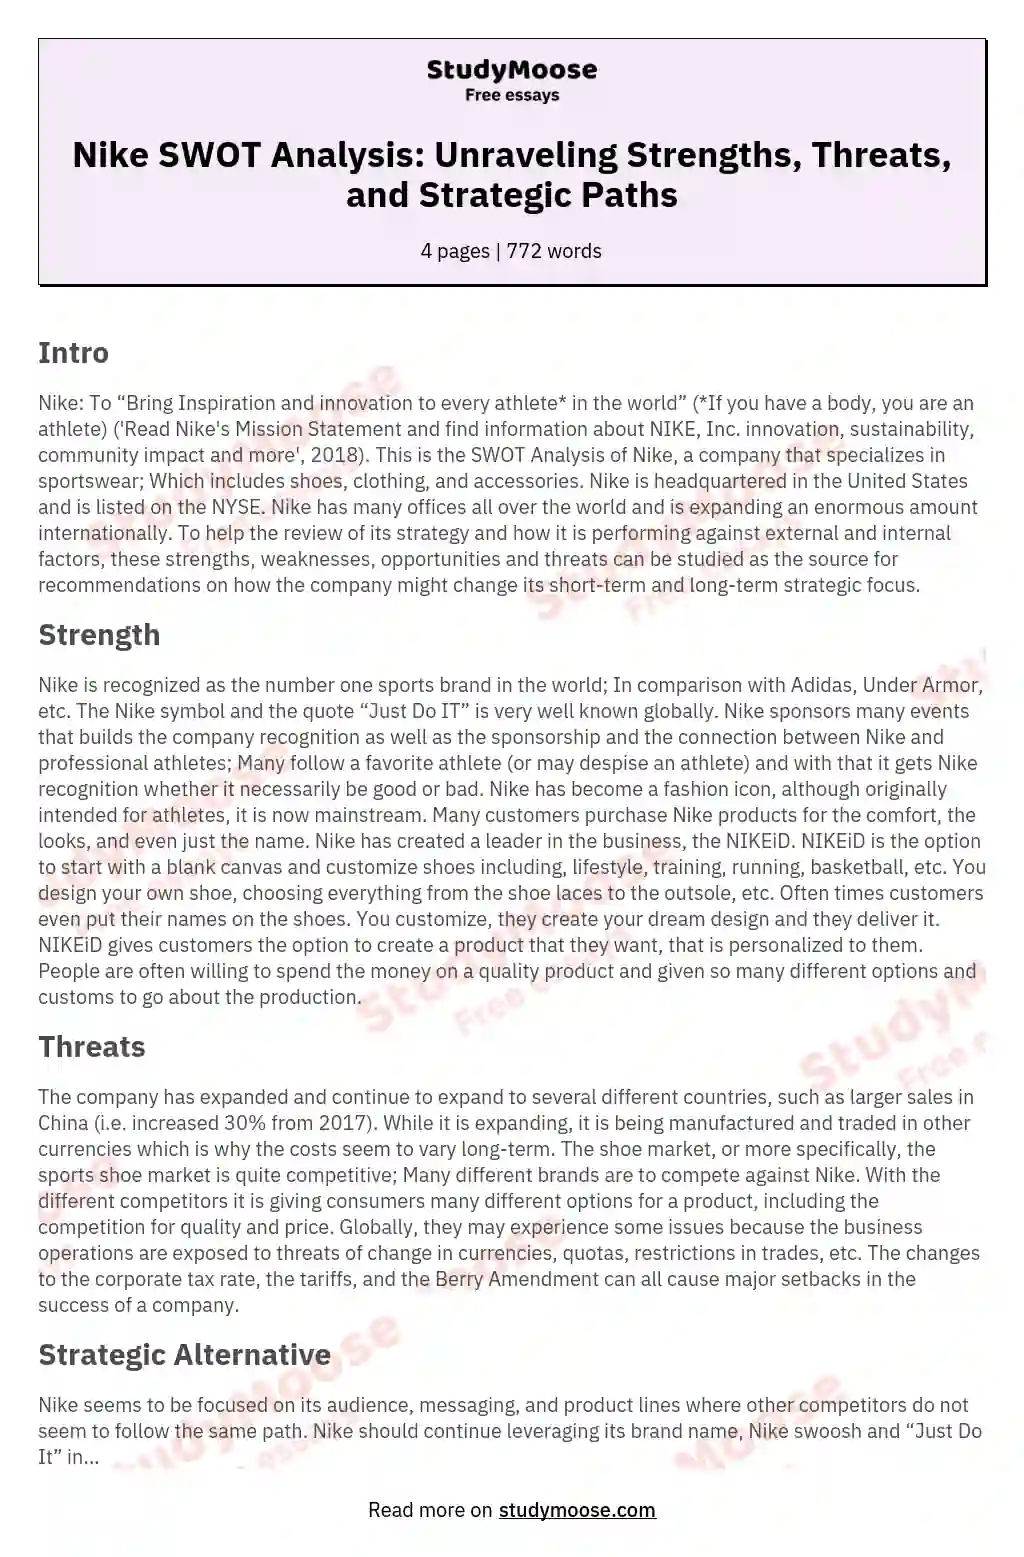 essay about swot analysis